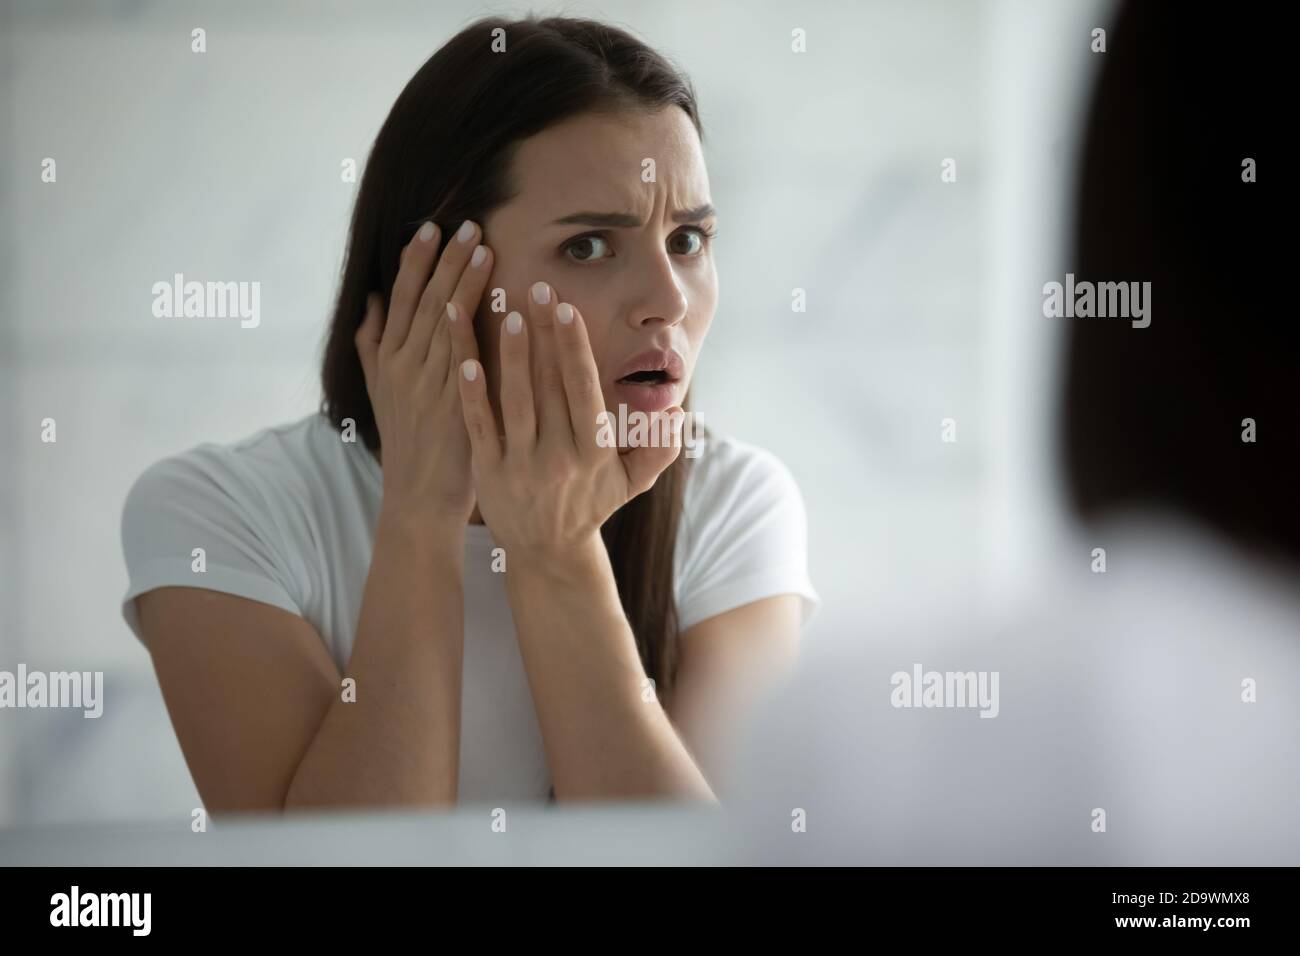 Anxious girl teenager troubled by bad condition of facial skin Stock Photo